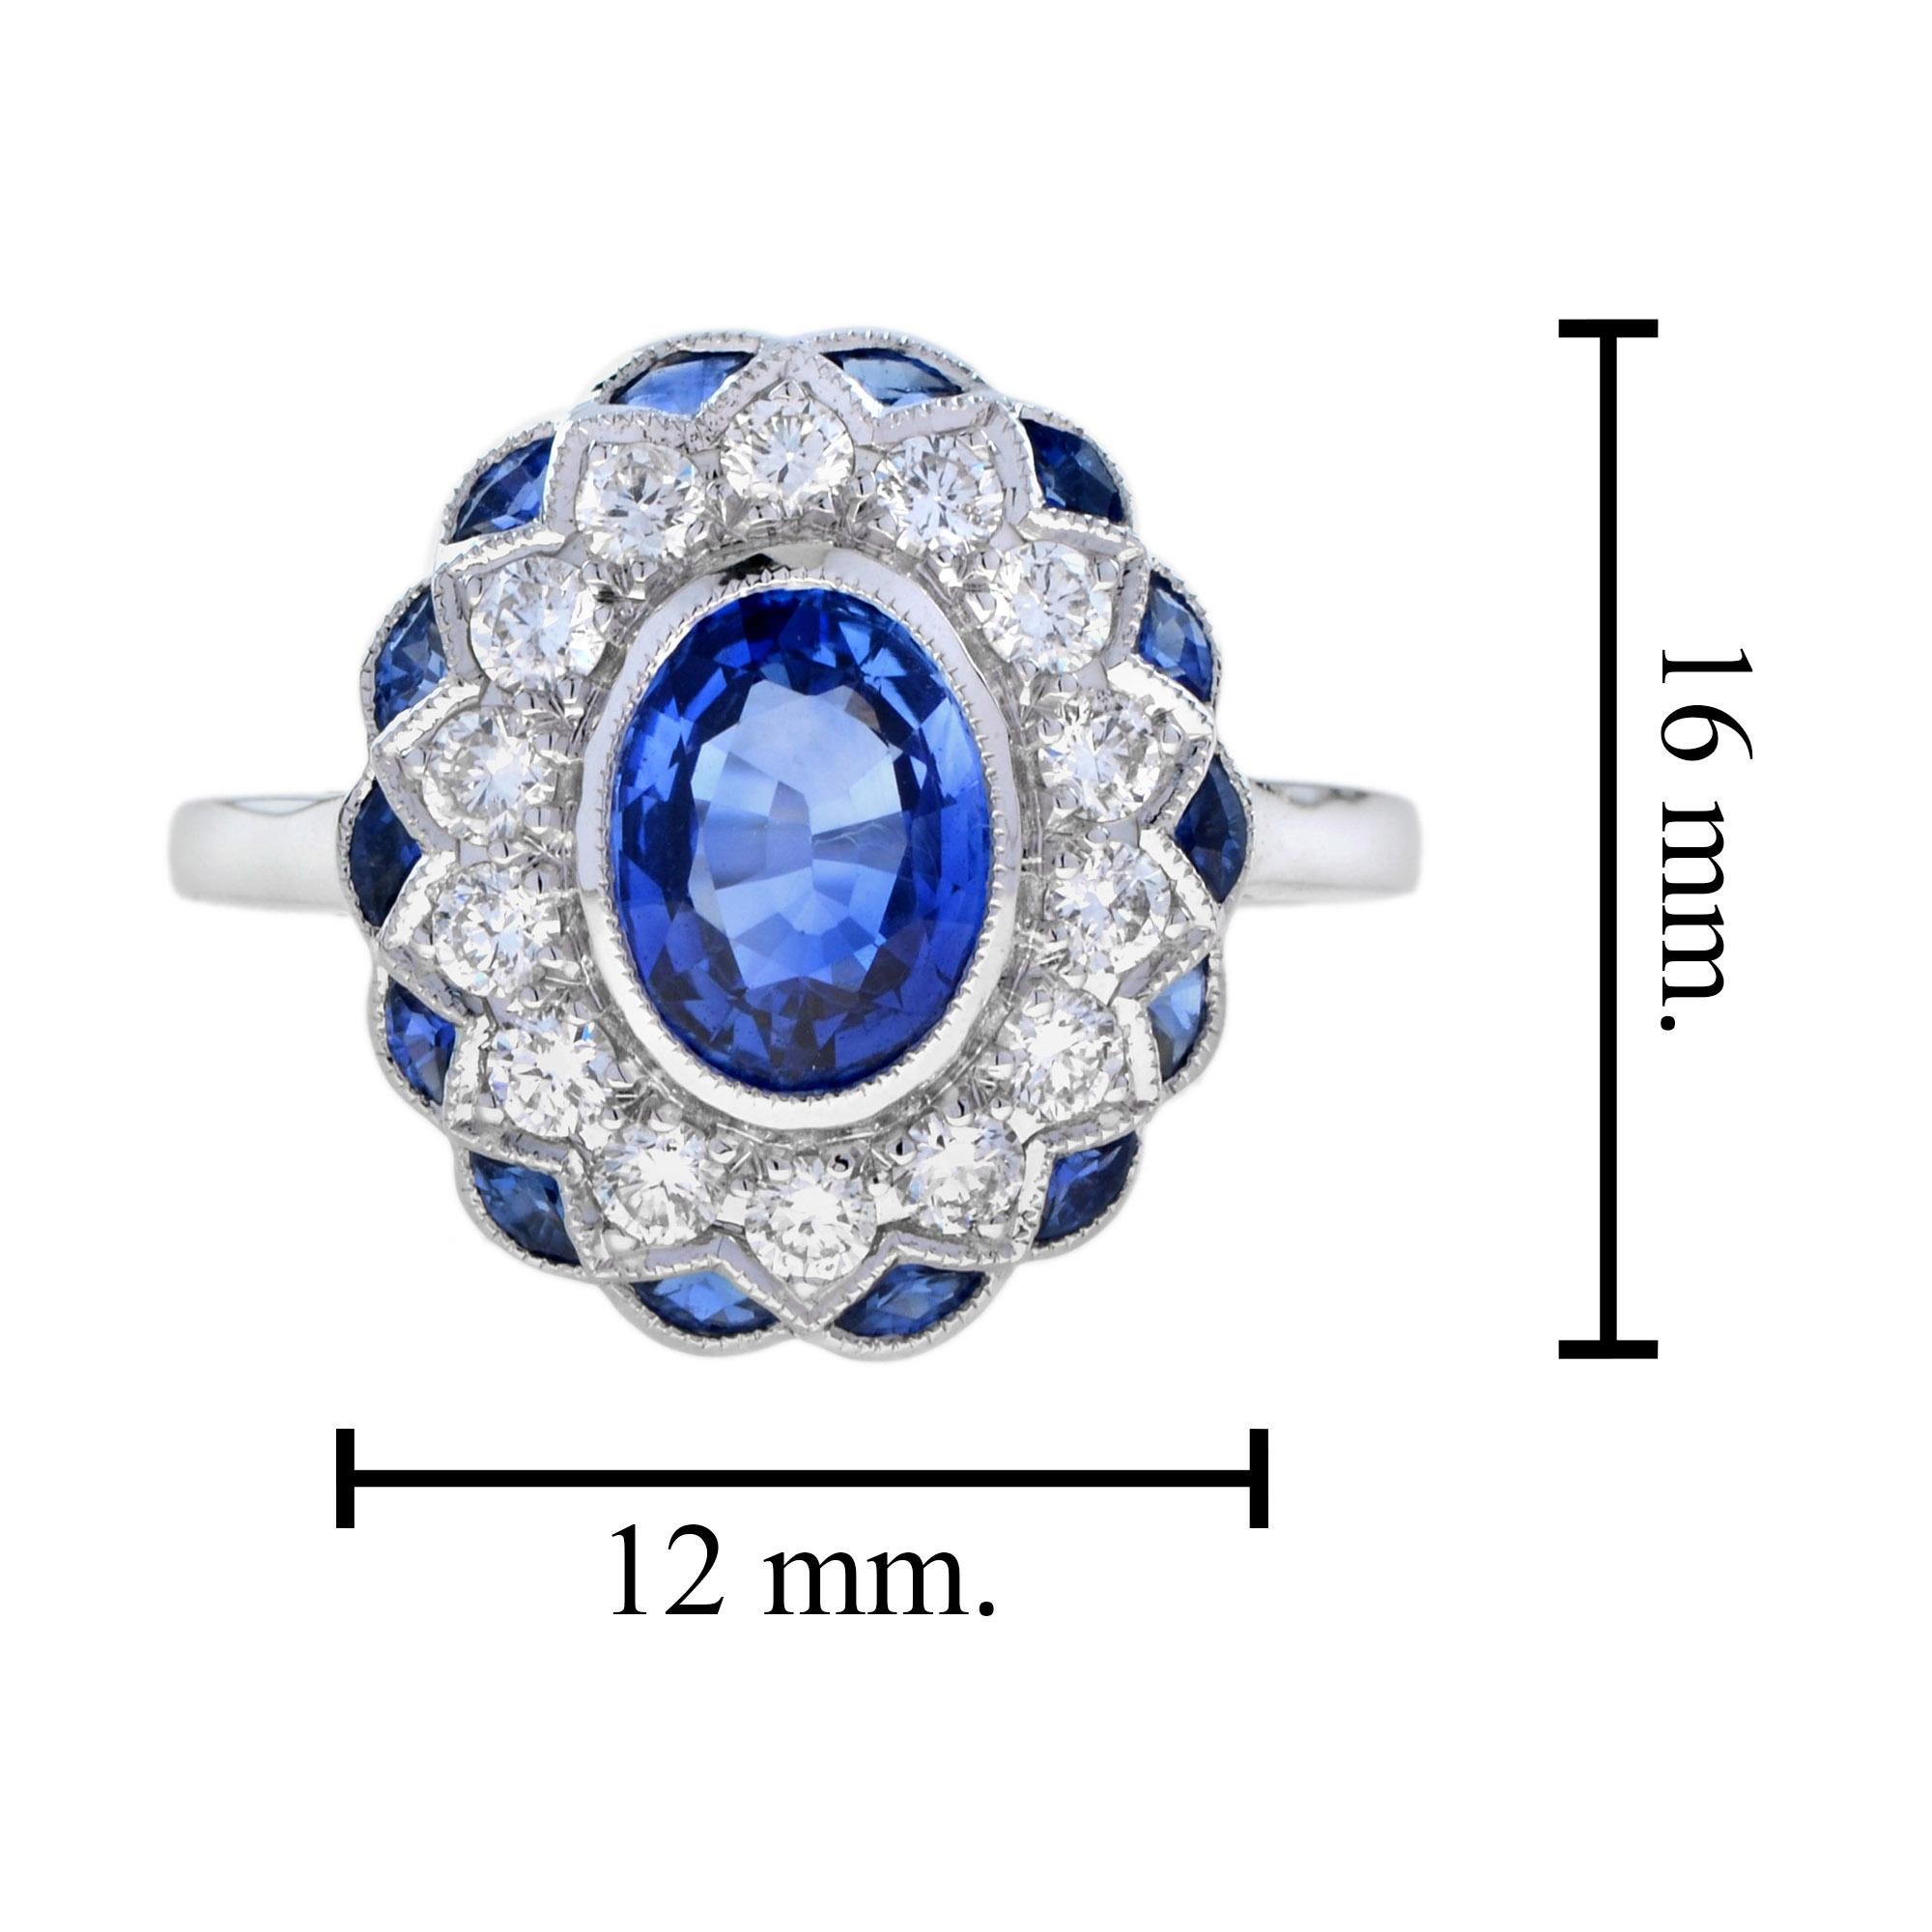 Oval Cut Ceylon Sapphire and Diamond Art Deco Style Halo Ring in 18K White Gold For Sale 3